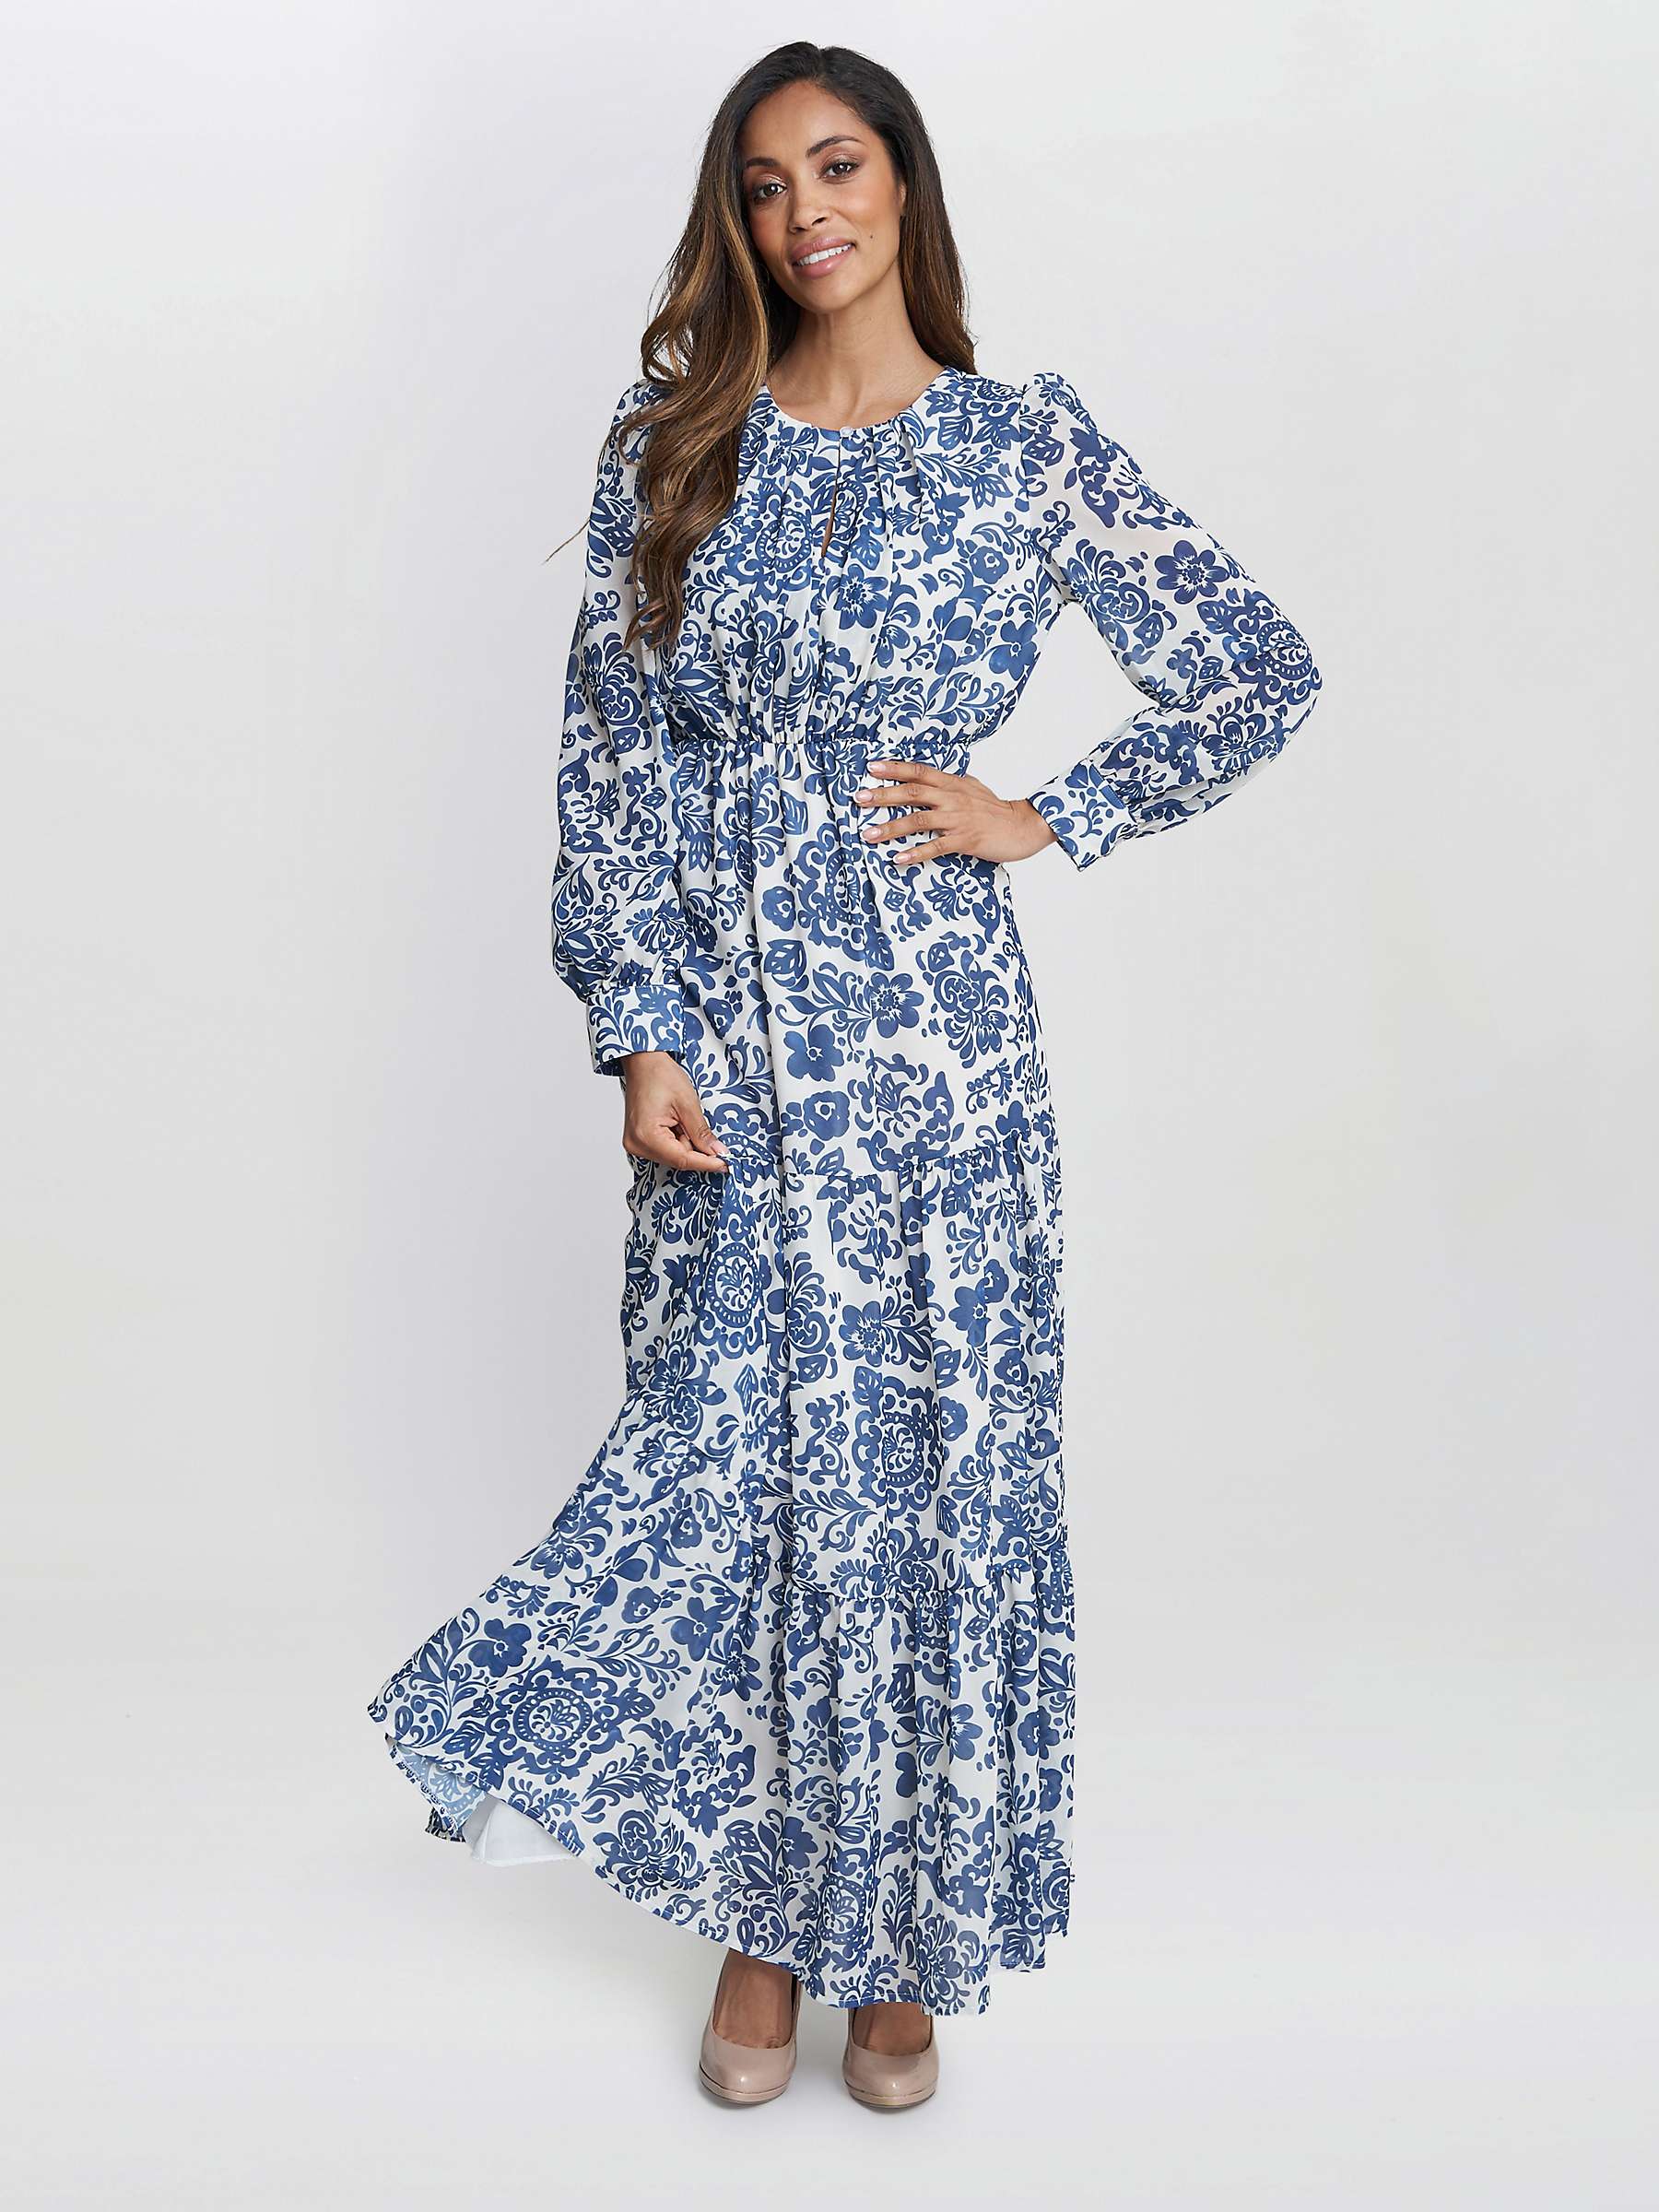 Buy Gina Bacconi Jojo Tiered Floral Maxi Dress, Navy/Cream Online at johnlewis.com